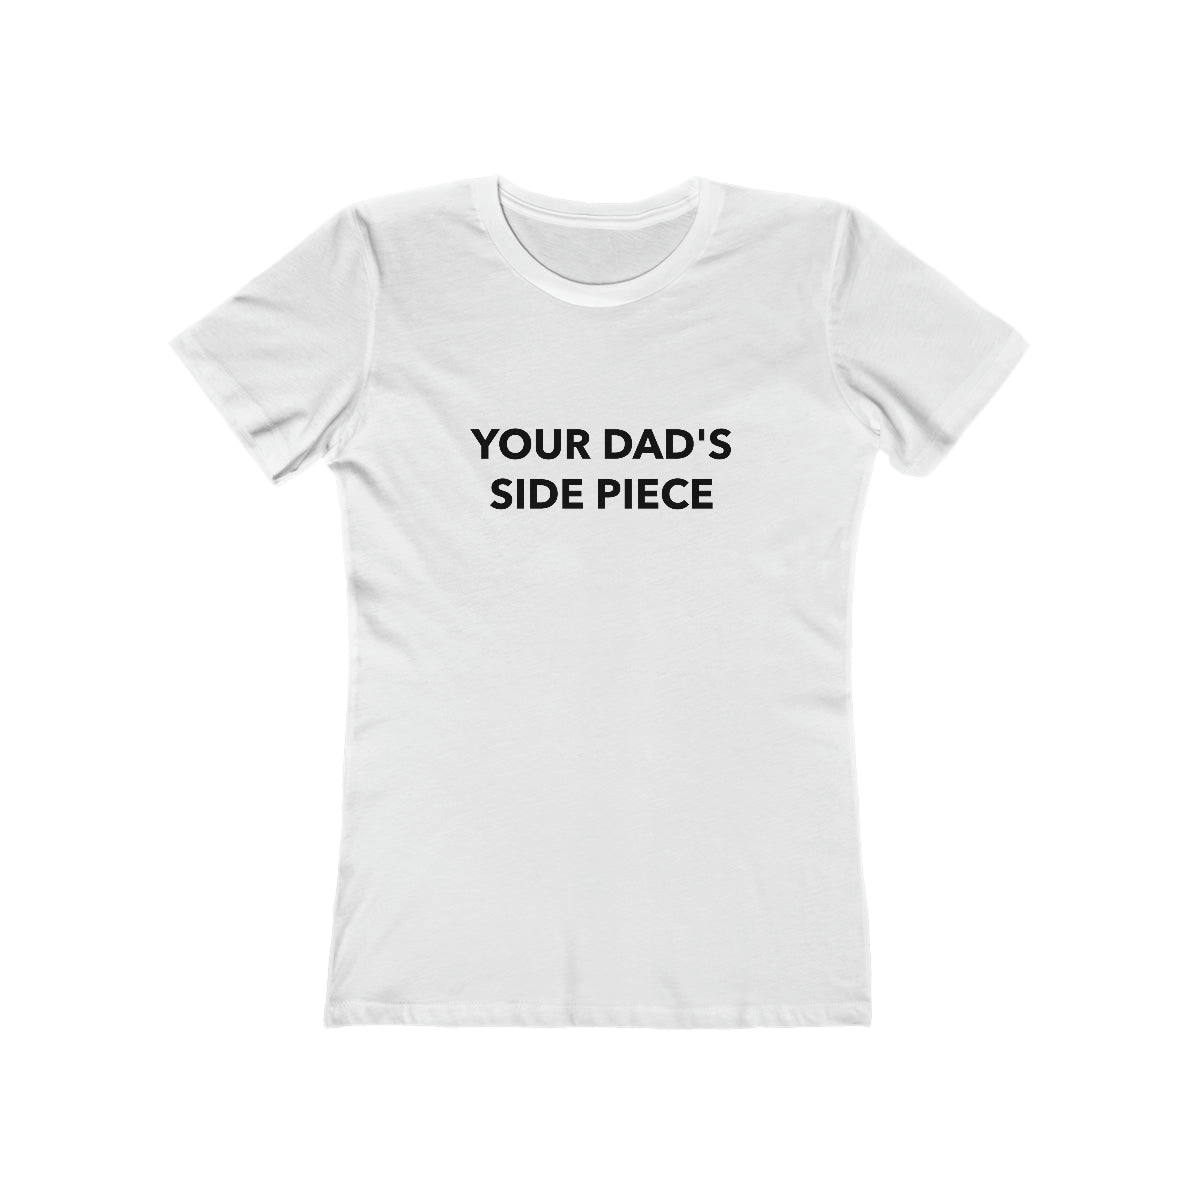 Your Dad's Side Piece - Women's T-shirt